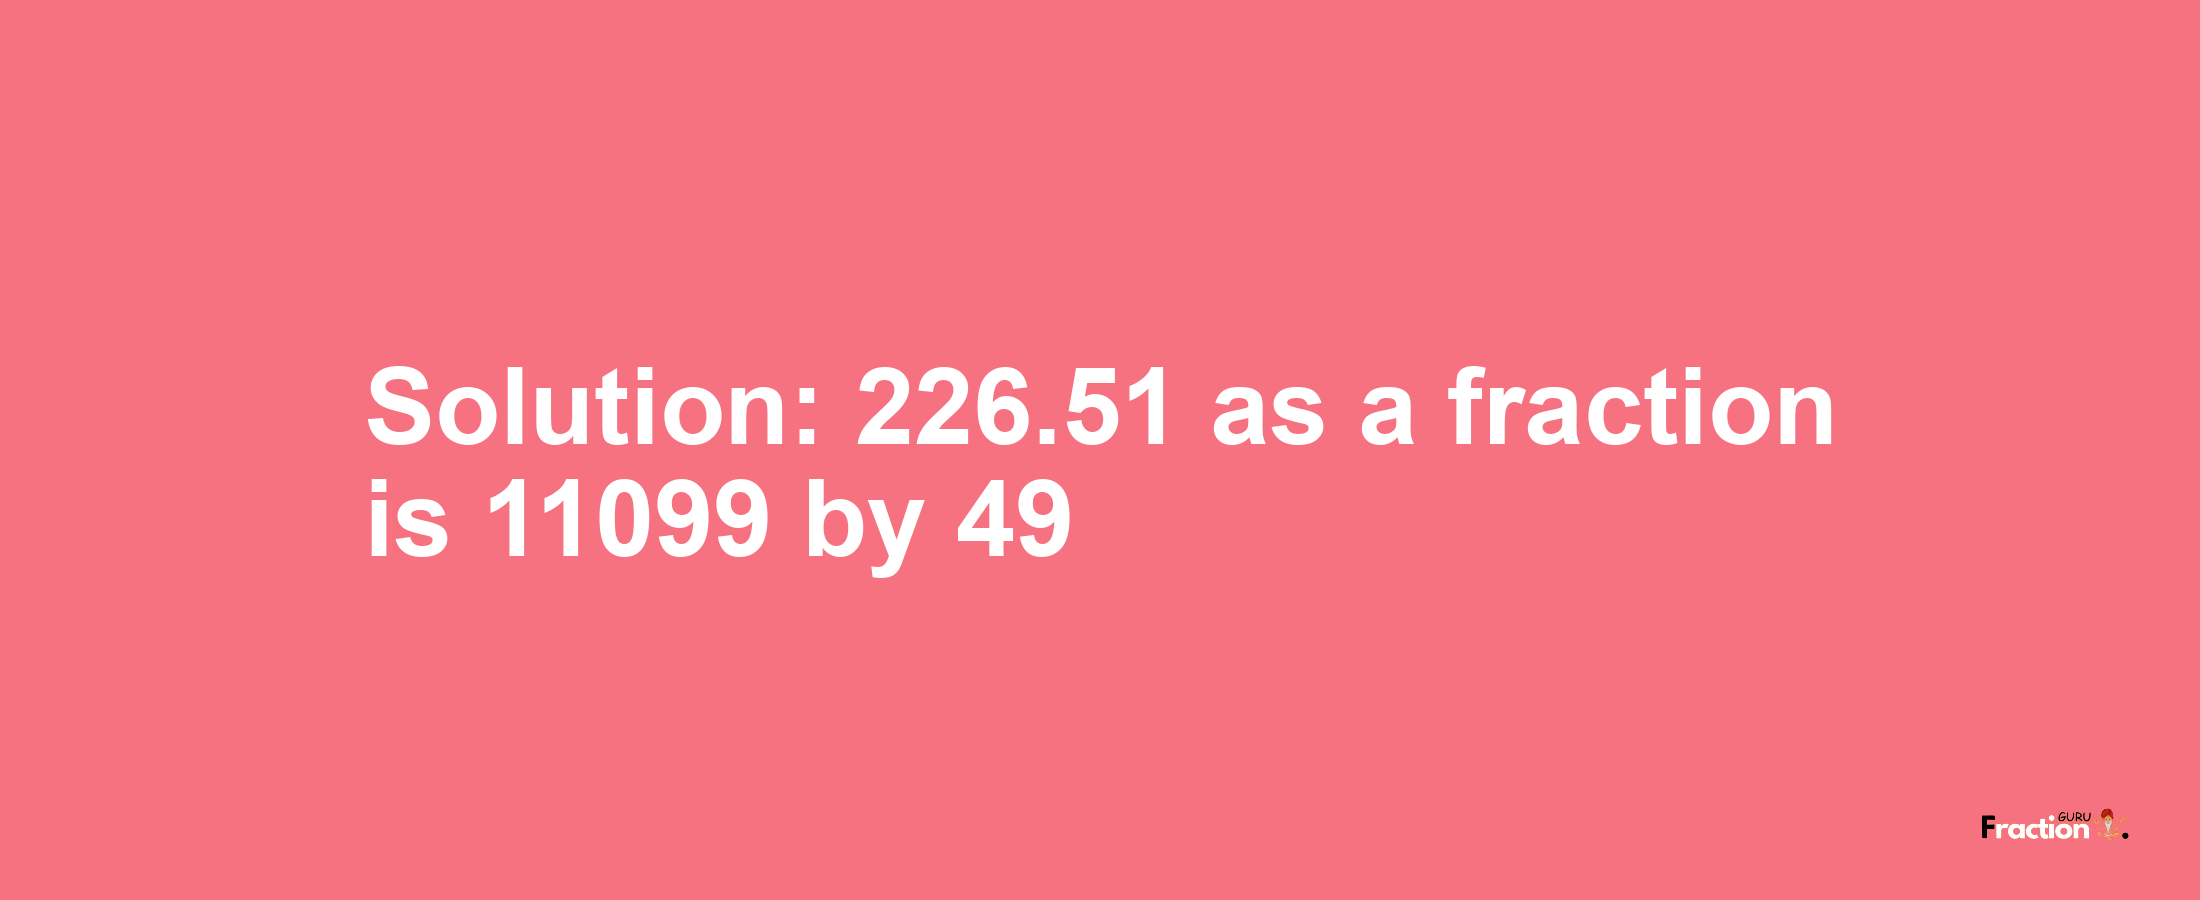 Solution:226.51 as a fraction is 11099/49